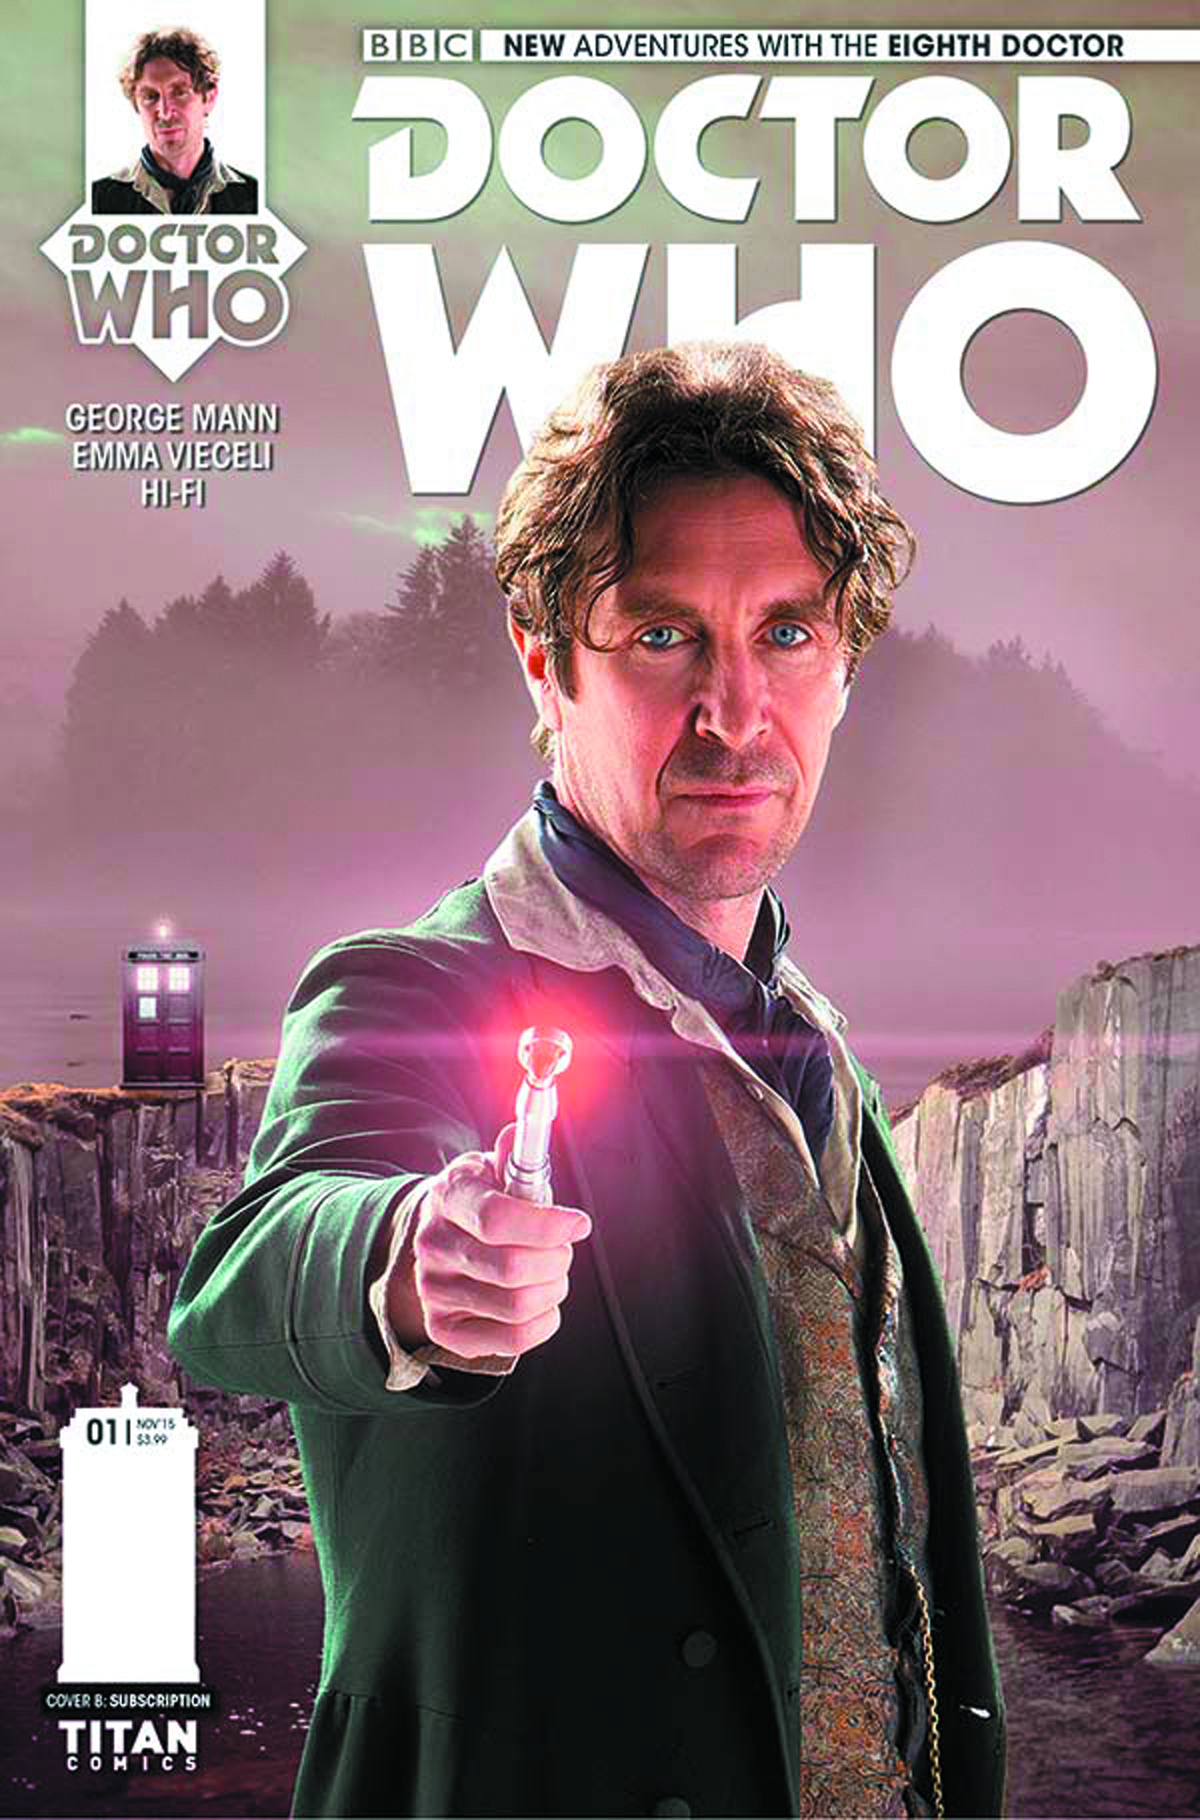 DOCTOR WHO 8TH #2 (OF 5) SUBSCRIPTION PHOTO